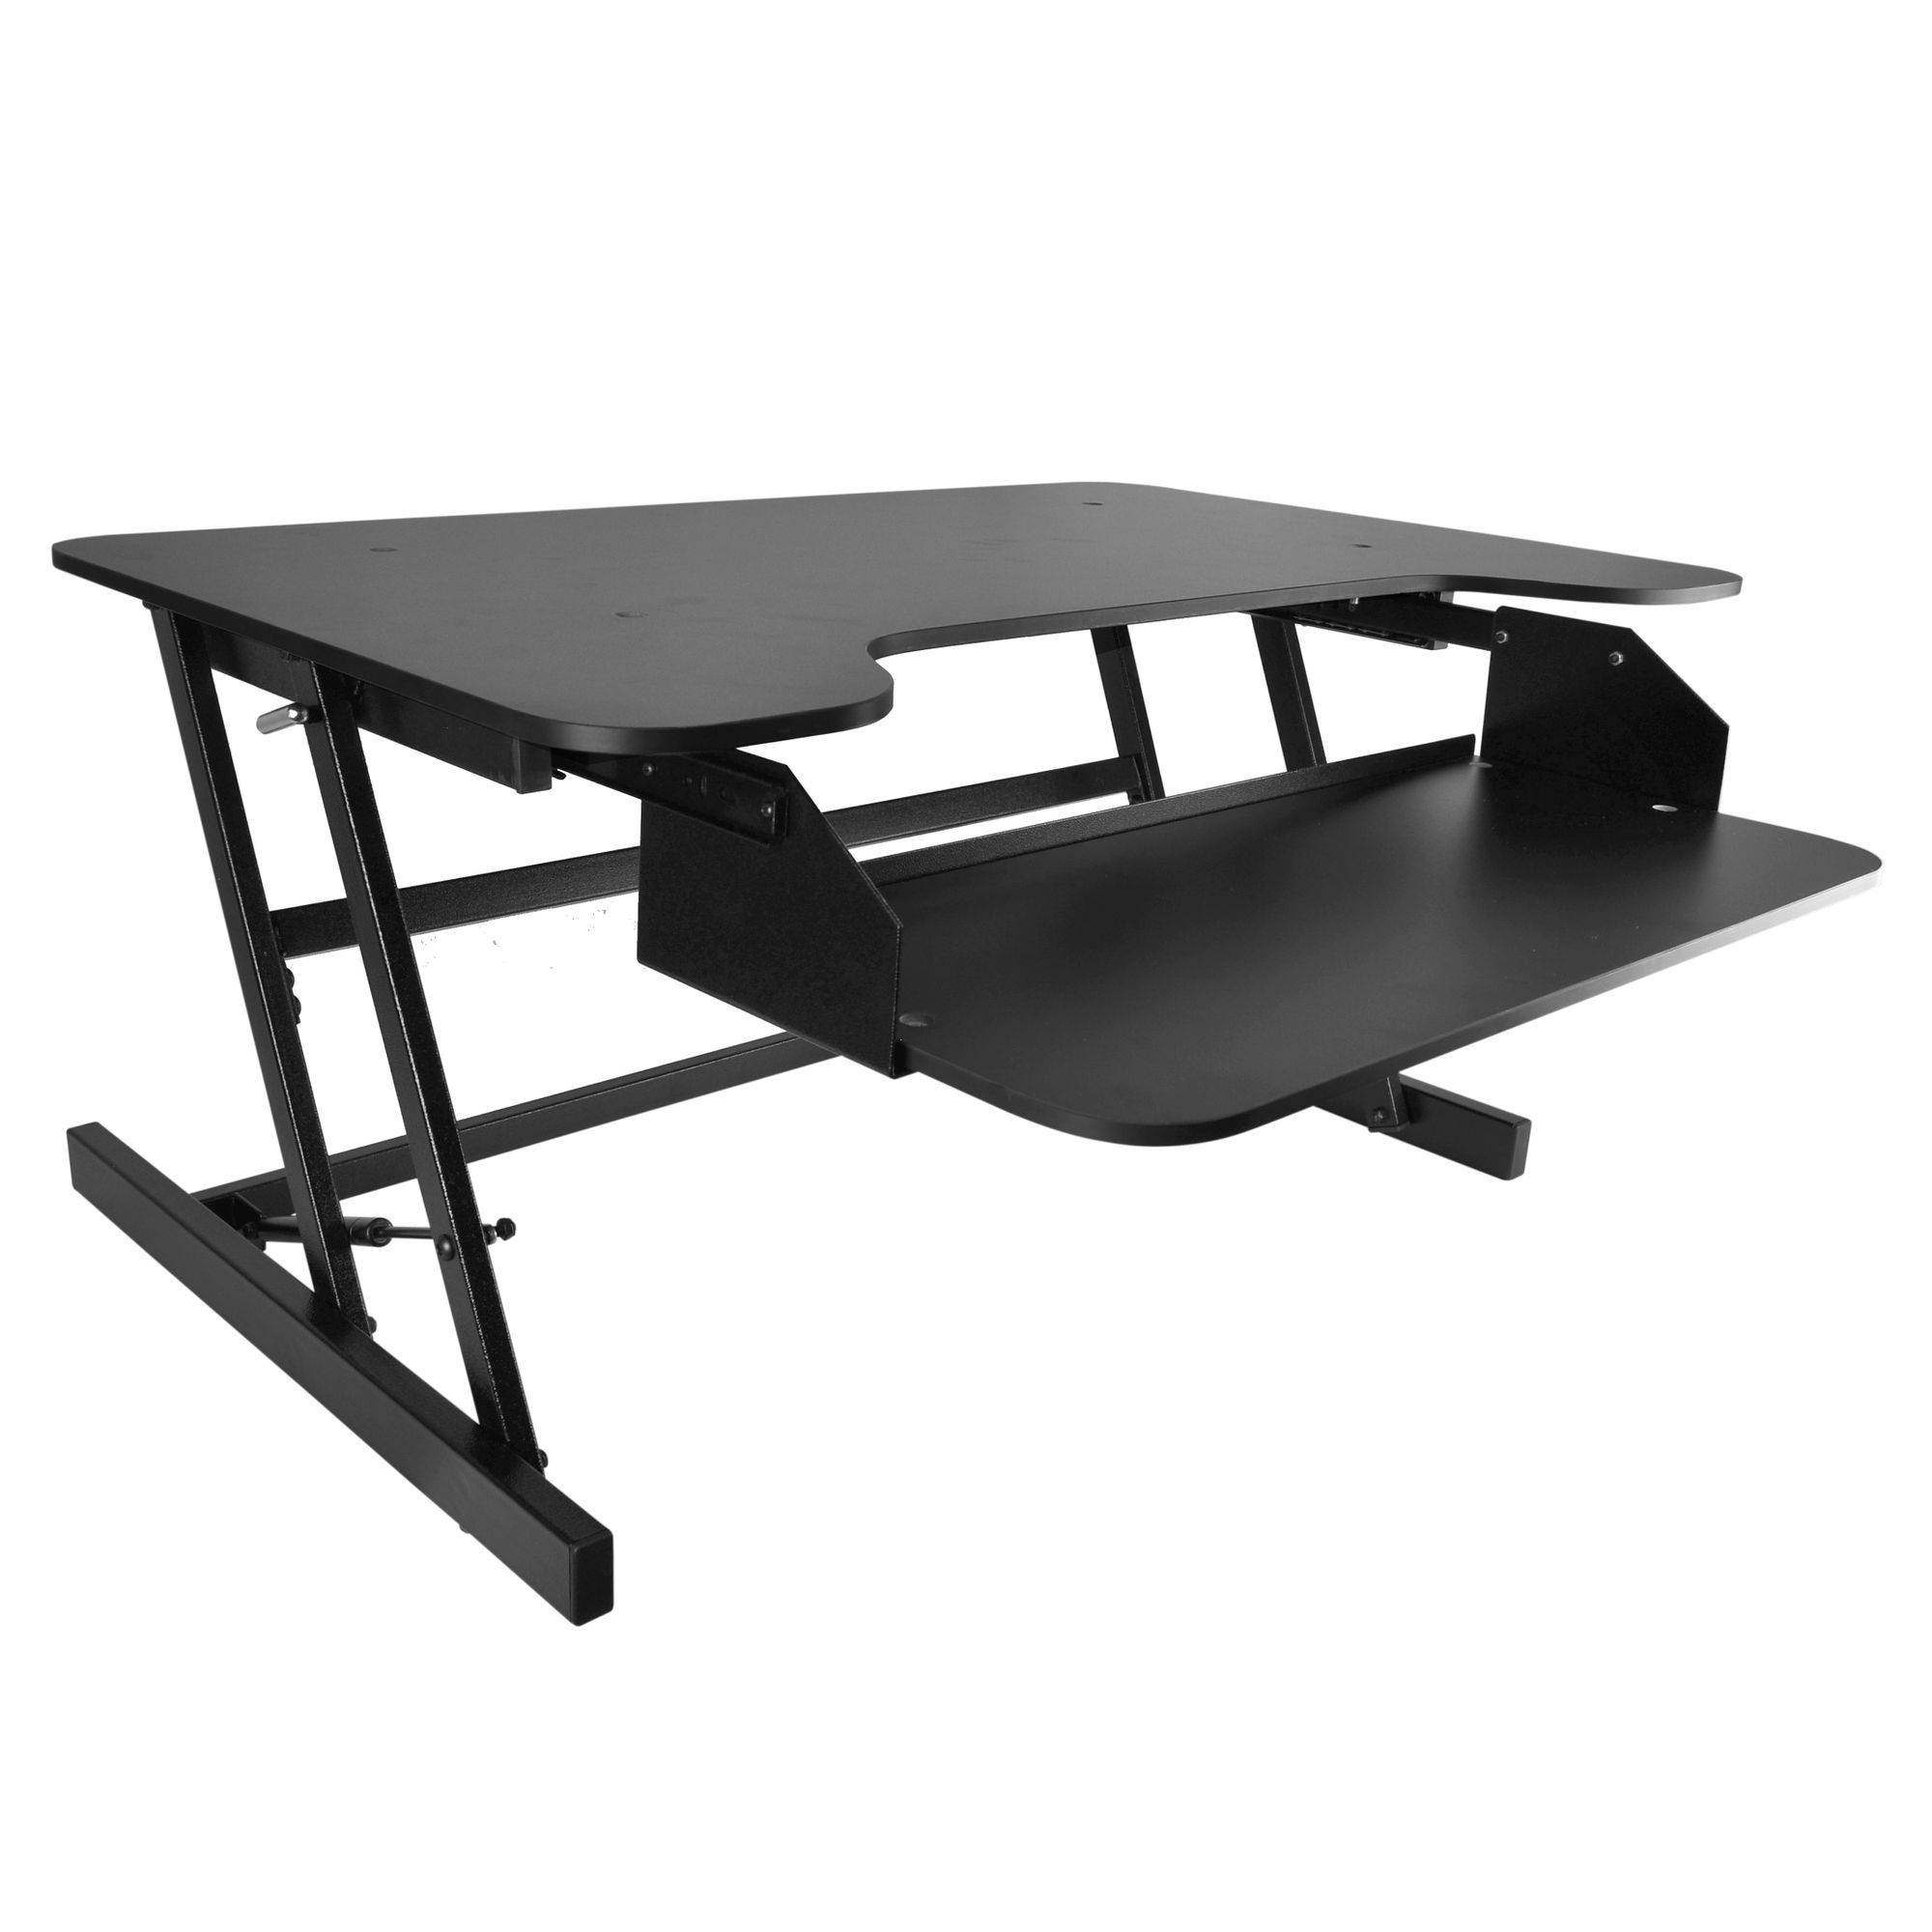 Pyle Portable Computer Workstation Desk, Adjustable Height, Keyboard Pull Out (PDRIS06)